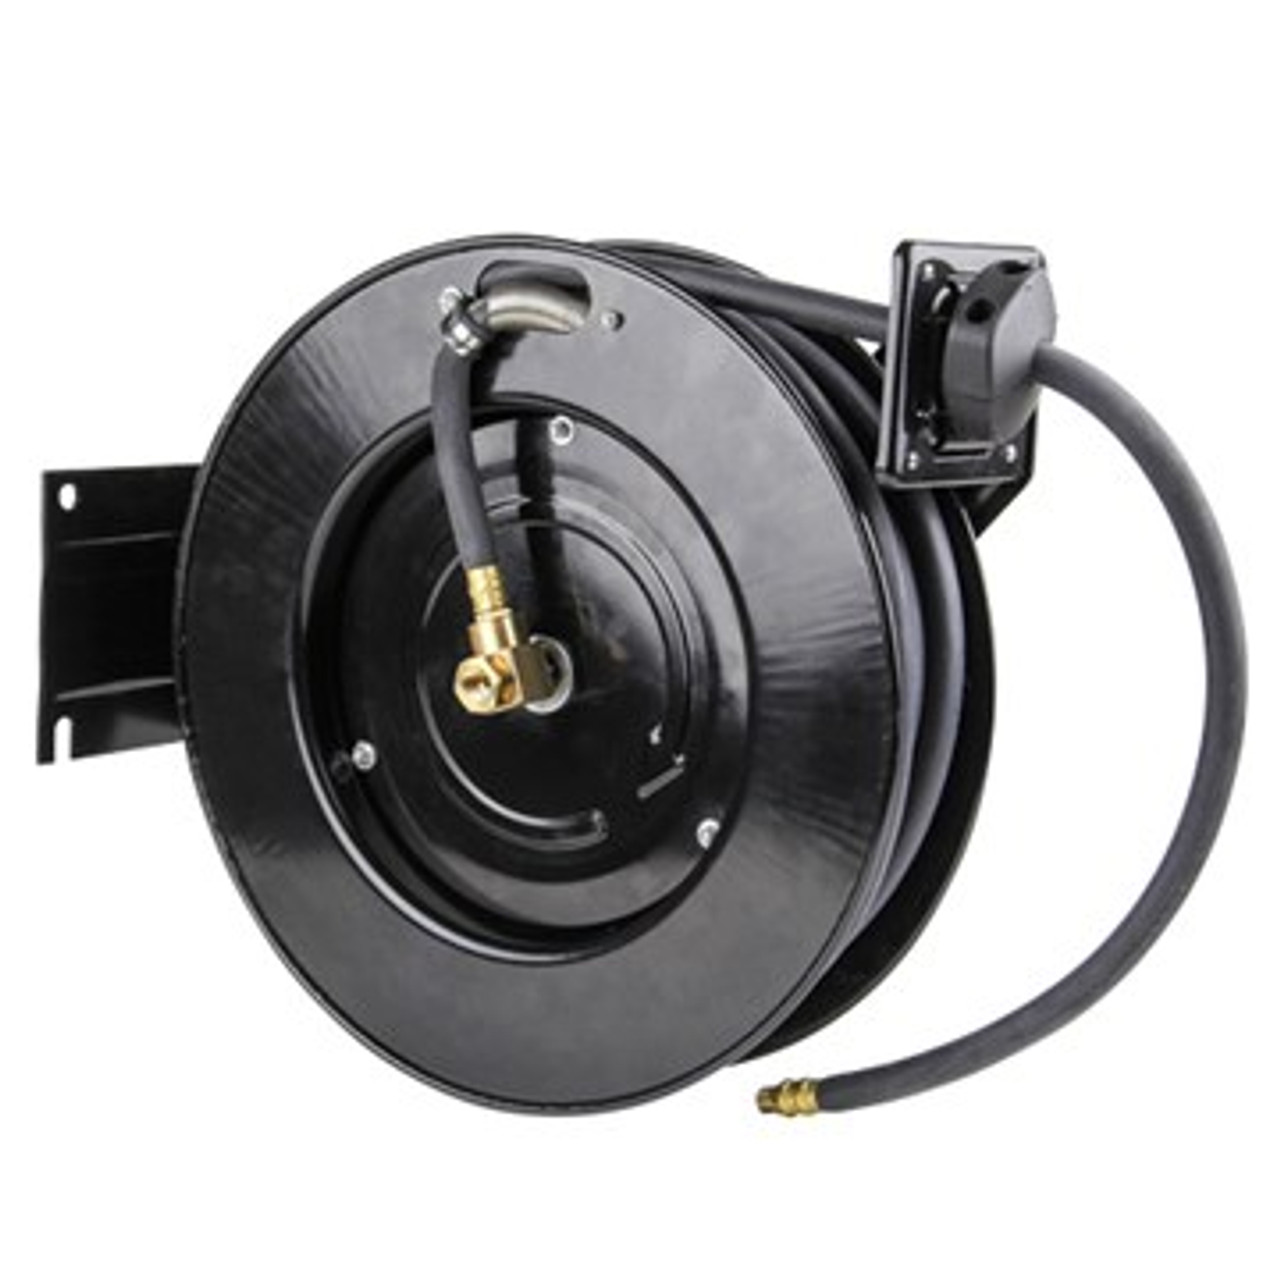 SIP Wall Mounted Pro Air Hose Reel 15 Metre - Marshall Industrial Supplies